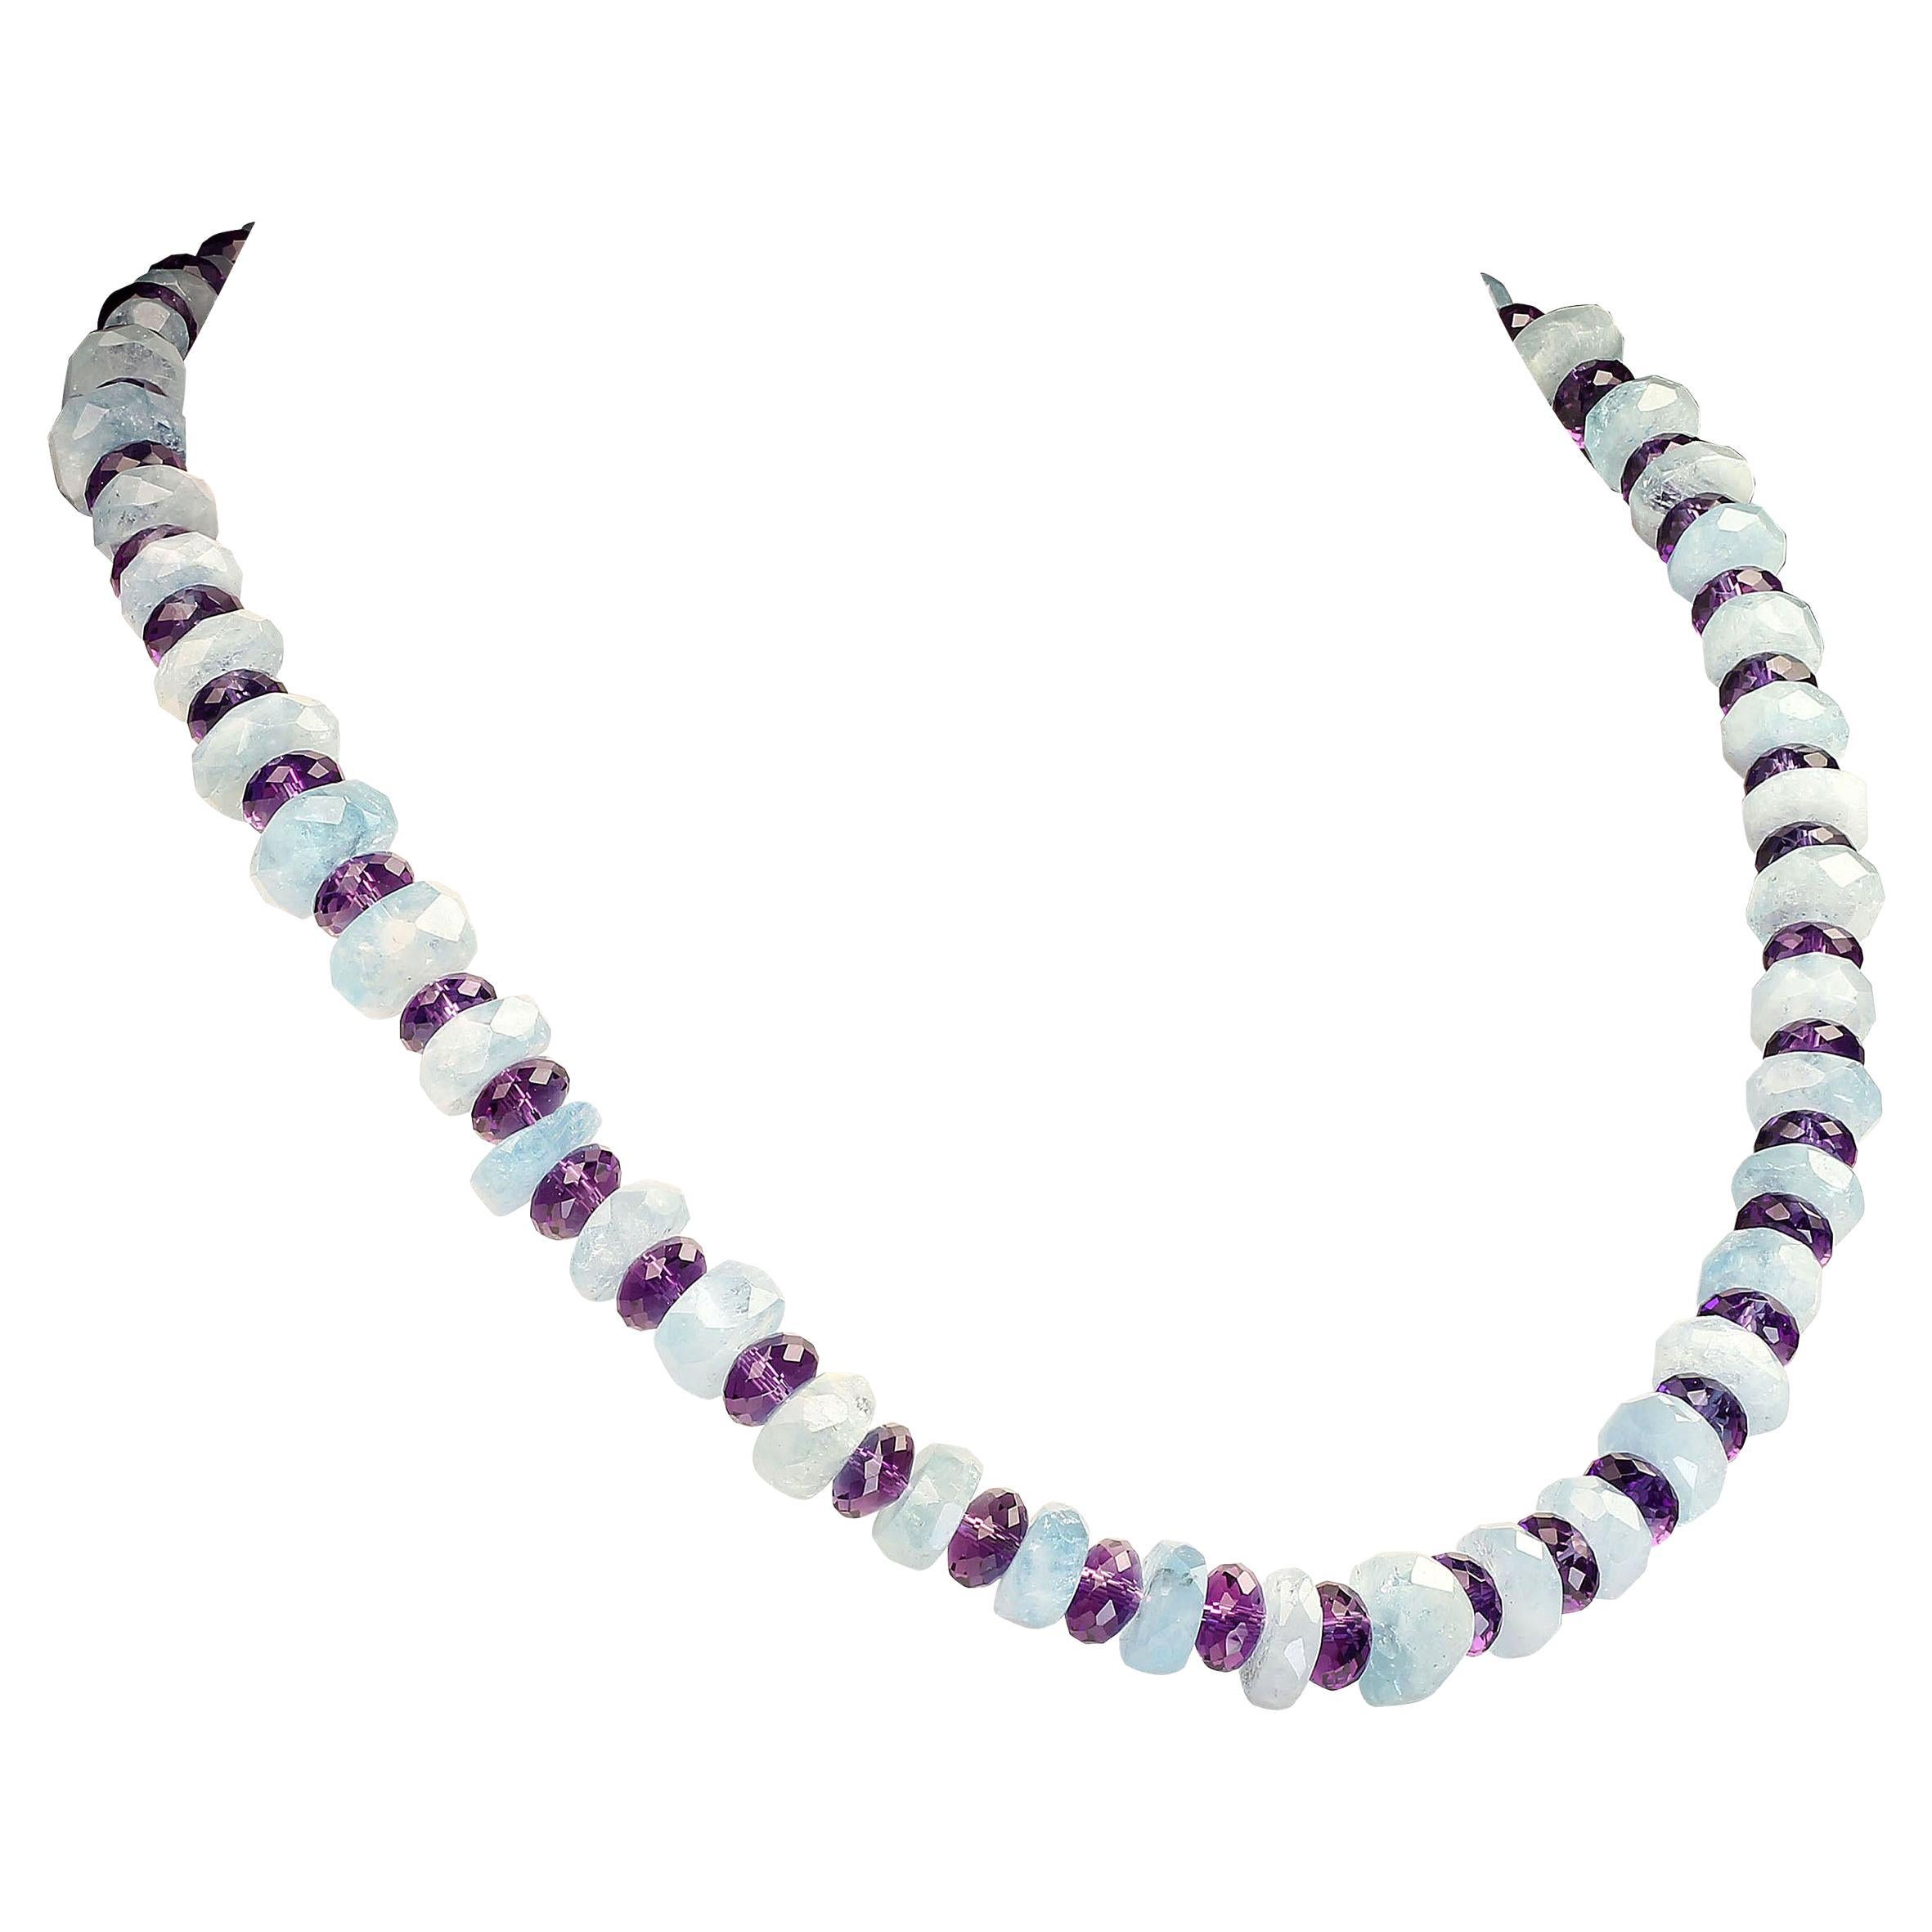 AJD 17 Inch Graduated Amethyst and Aquamarine Rondelle Necklace    